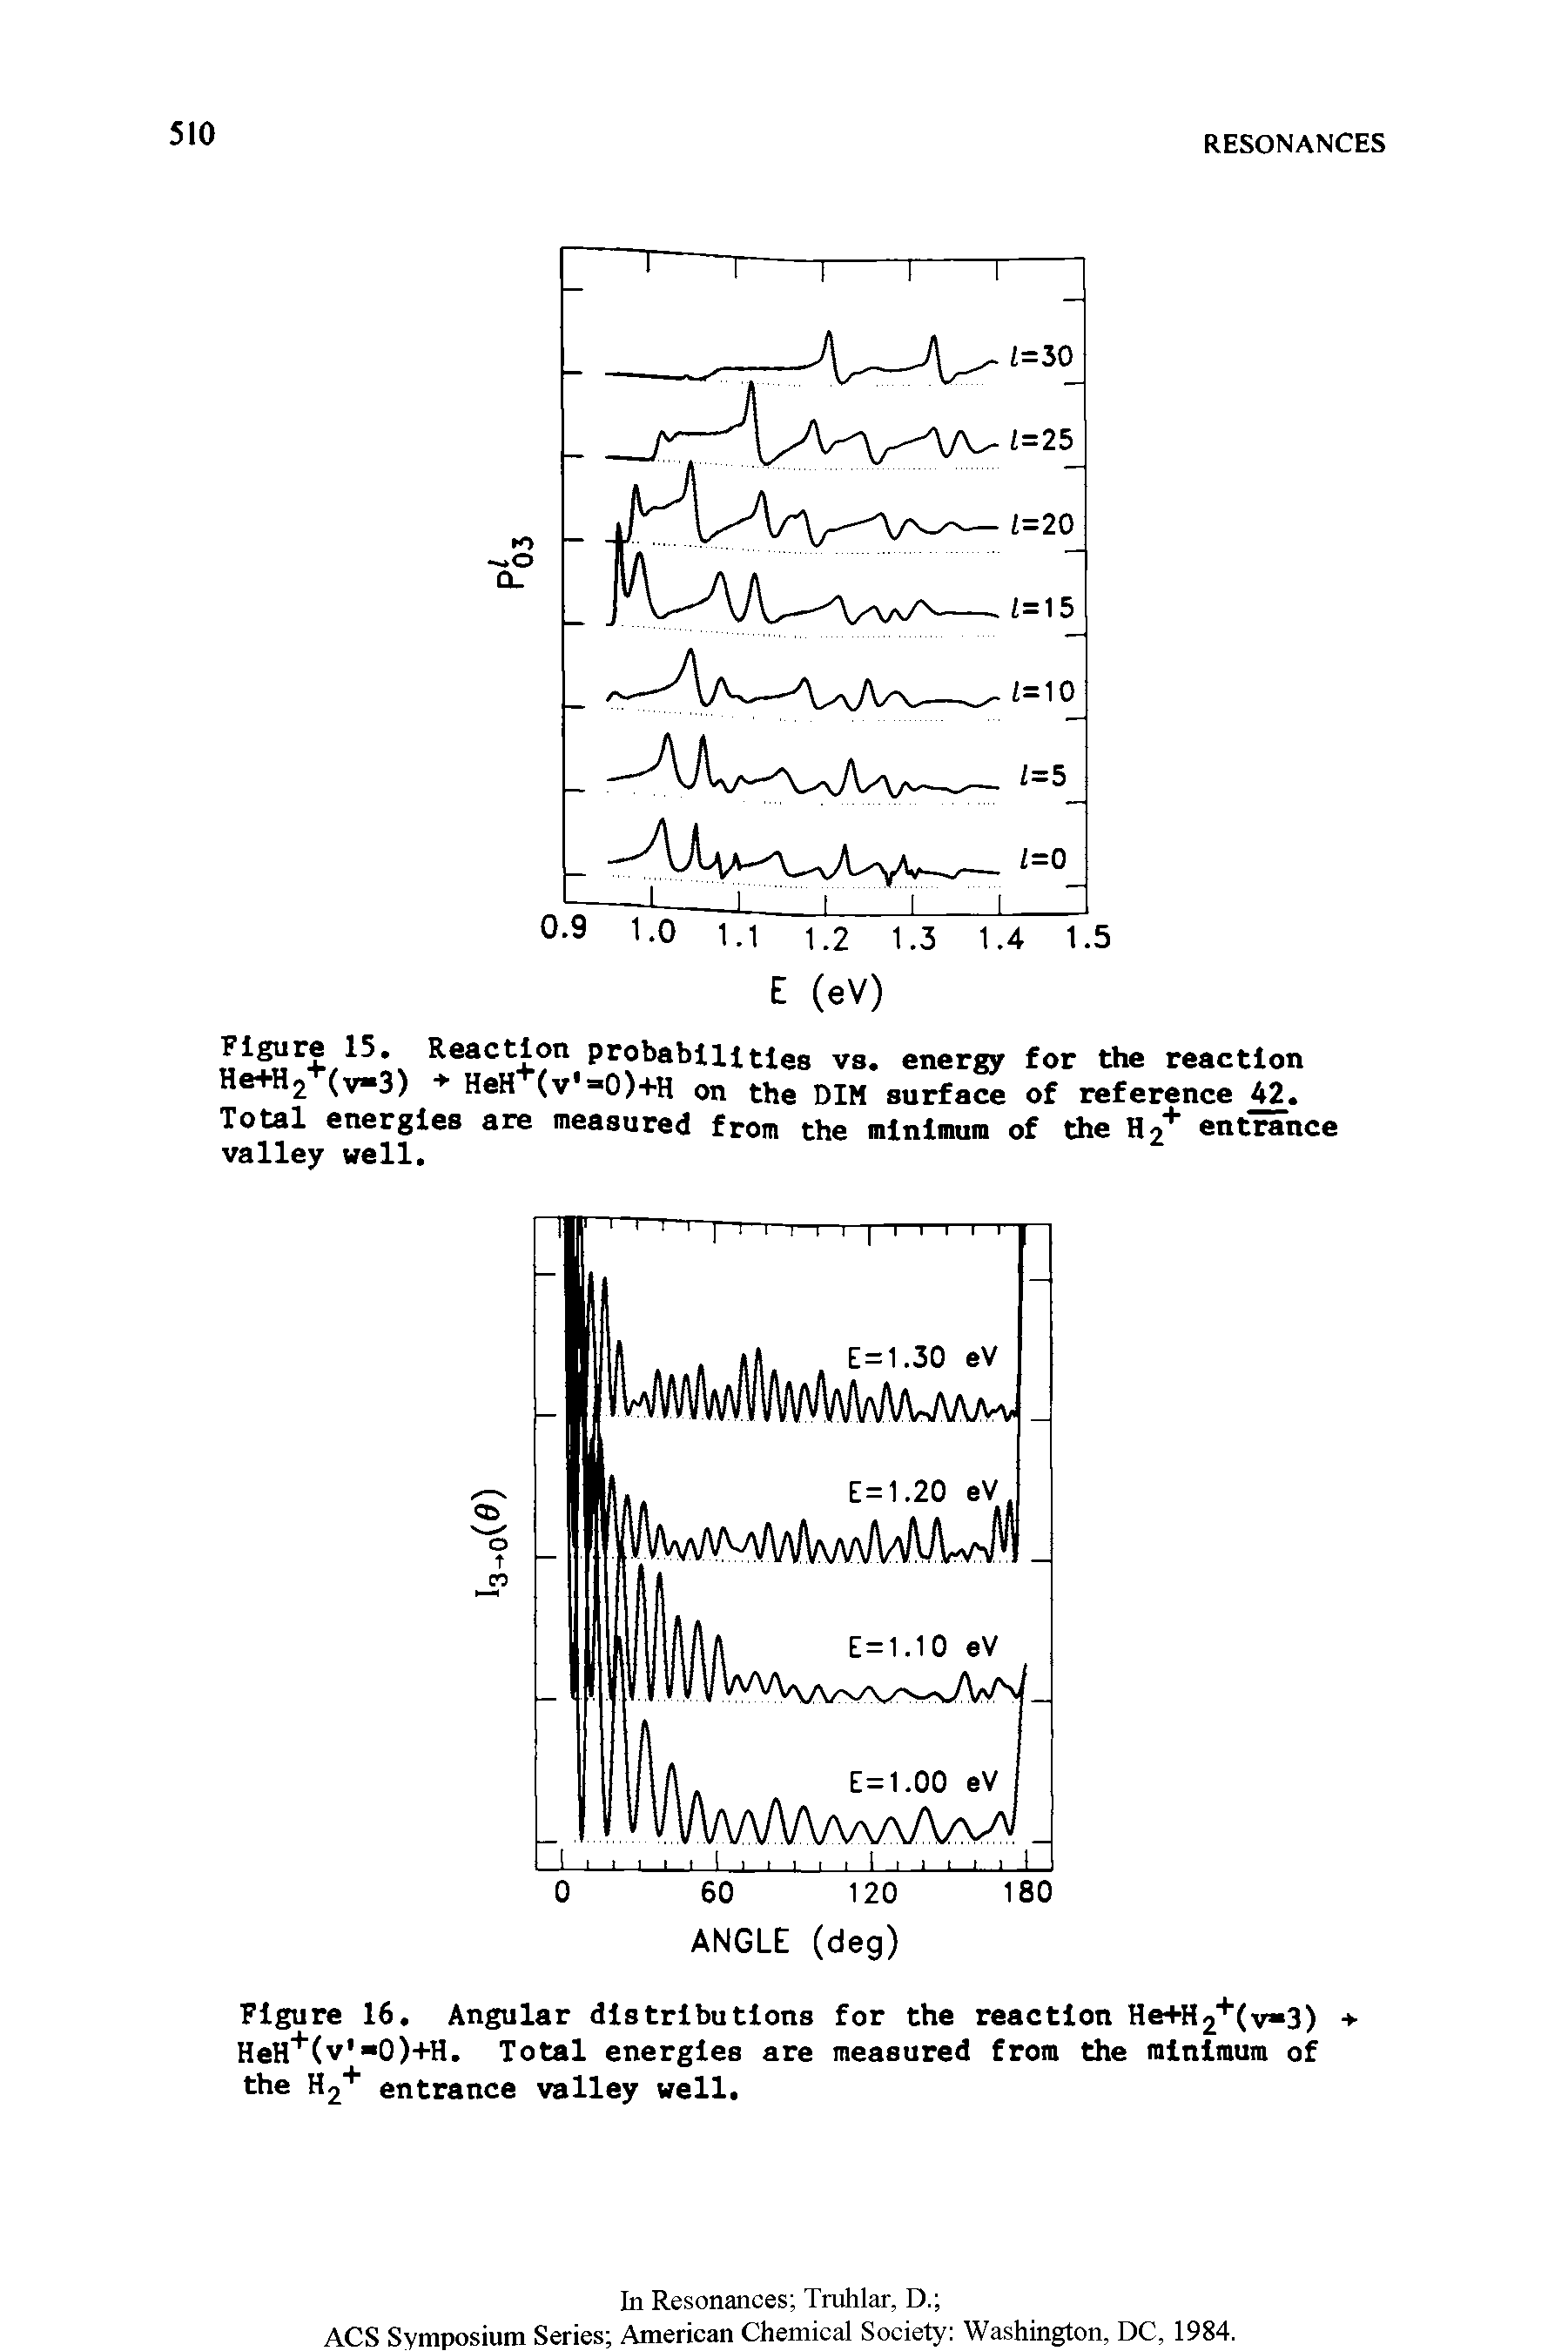 Figure 16. Angular distributions for the reaction He+H2 (v 3) HeH (v 0)+H. Total energies are measured from the minimum of the H2 entrance valley well.